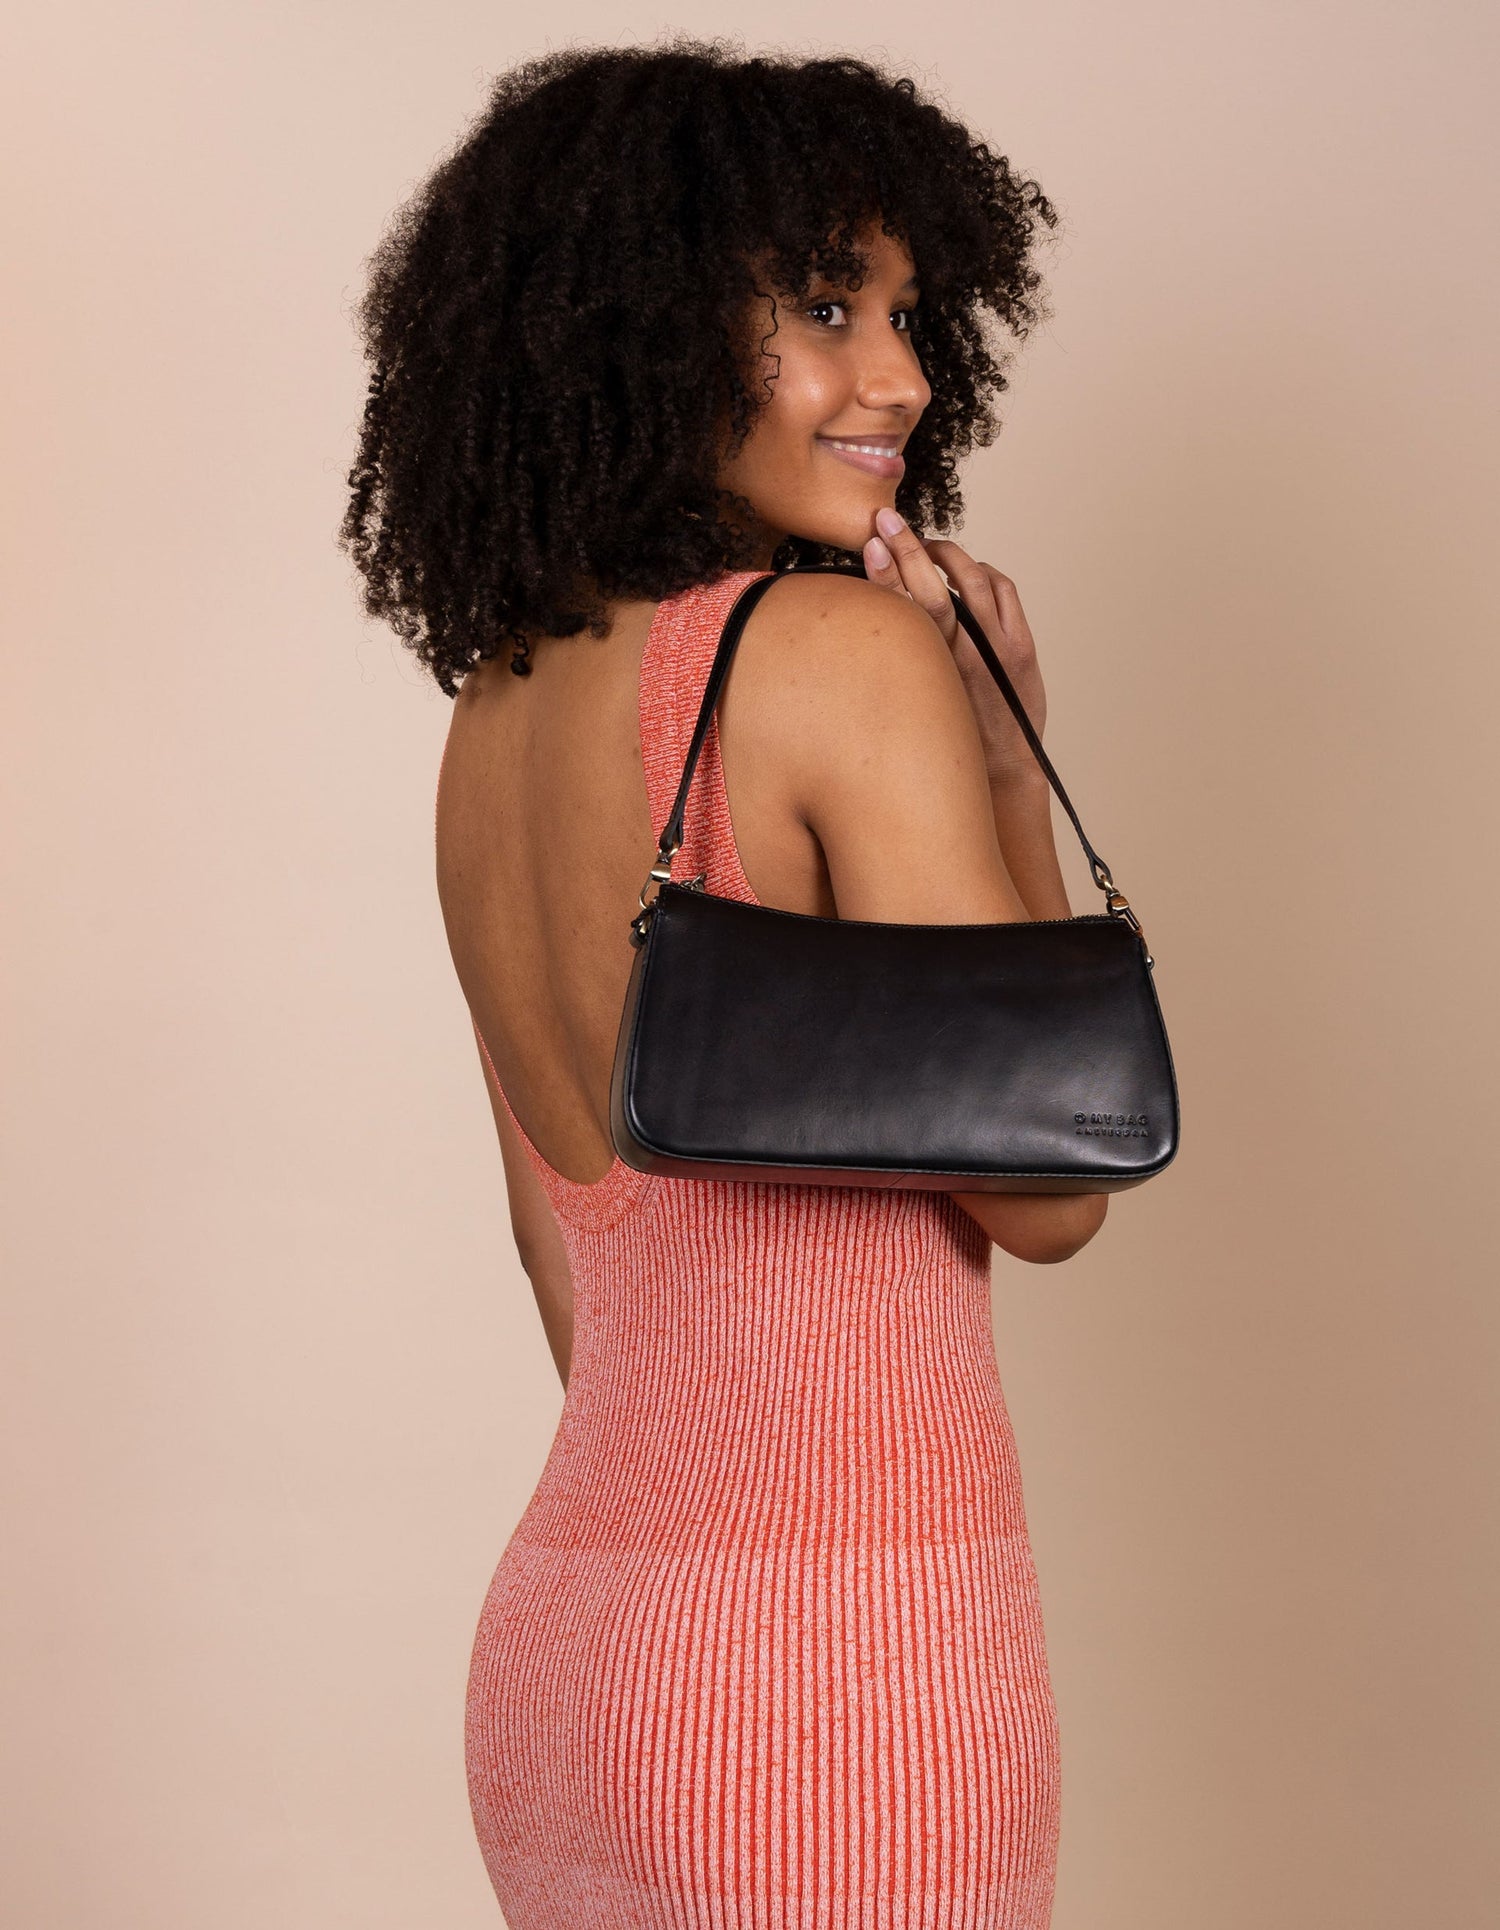 A bag that gives you an irreplaceable look and feel of a fun night out? Here she is! Small but mighty, Taylor has a compact and convenient design optimized to fit your most important belongings. She comes with one short strap and one long adjustable strap for a crossbody look. Made in India.